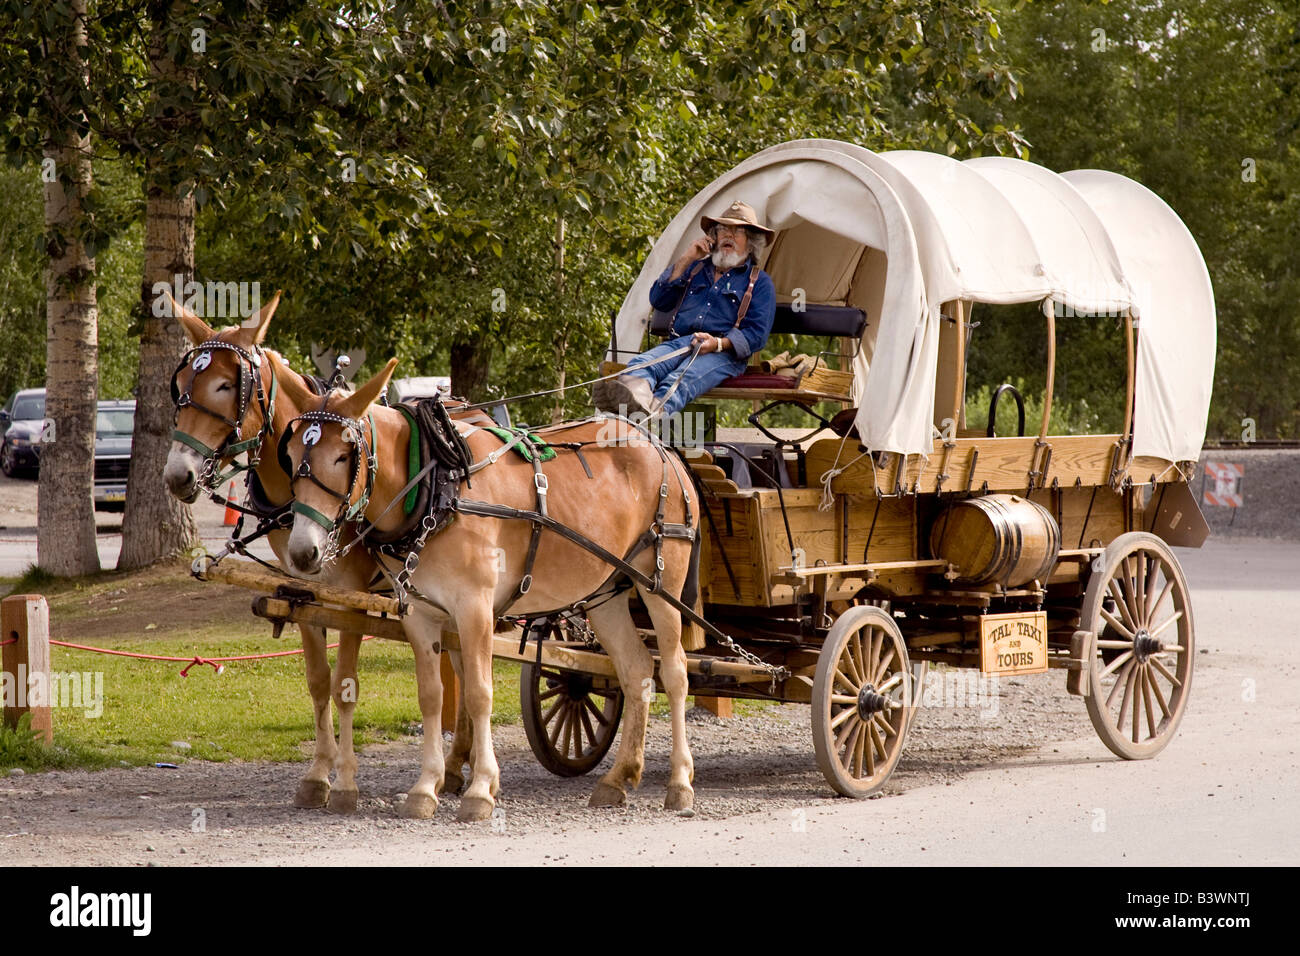 USA, Alaska, Talkeetna. Covered wagon pulled by two mules is a tour taxi for the town. Stock Photo